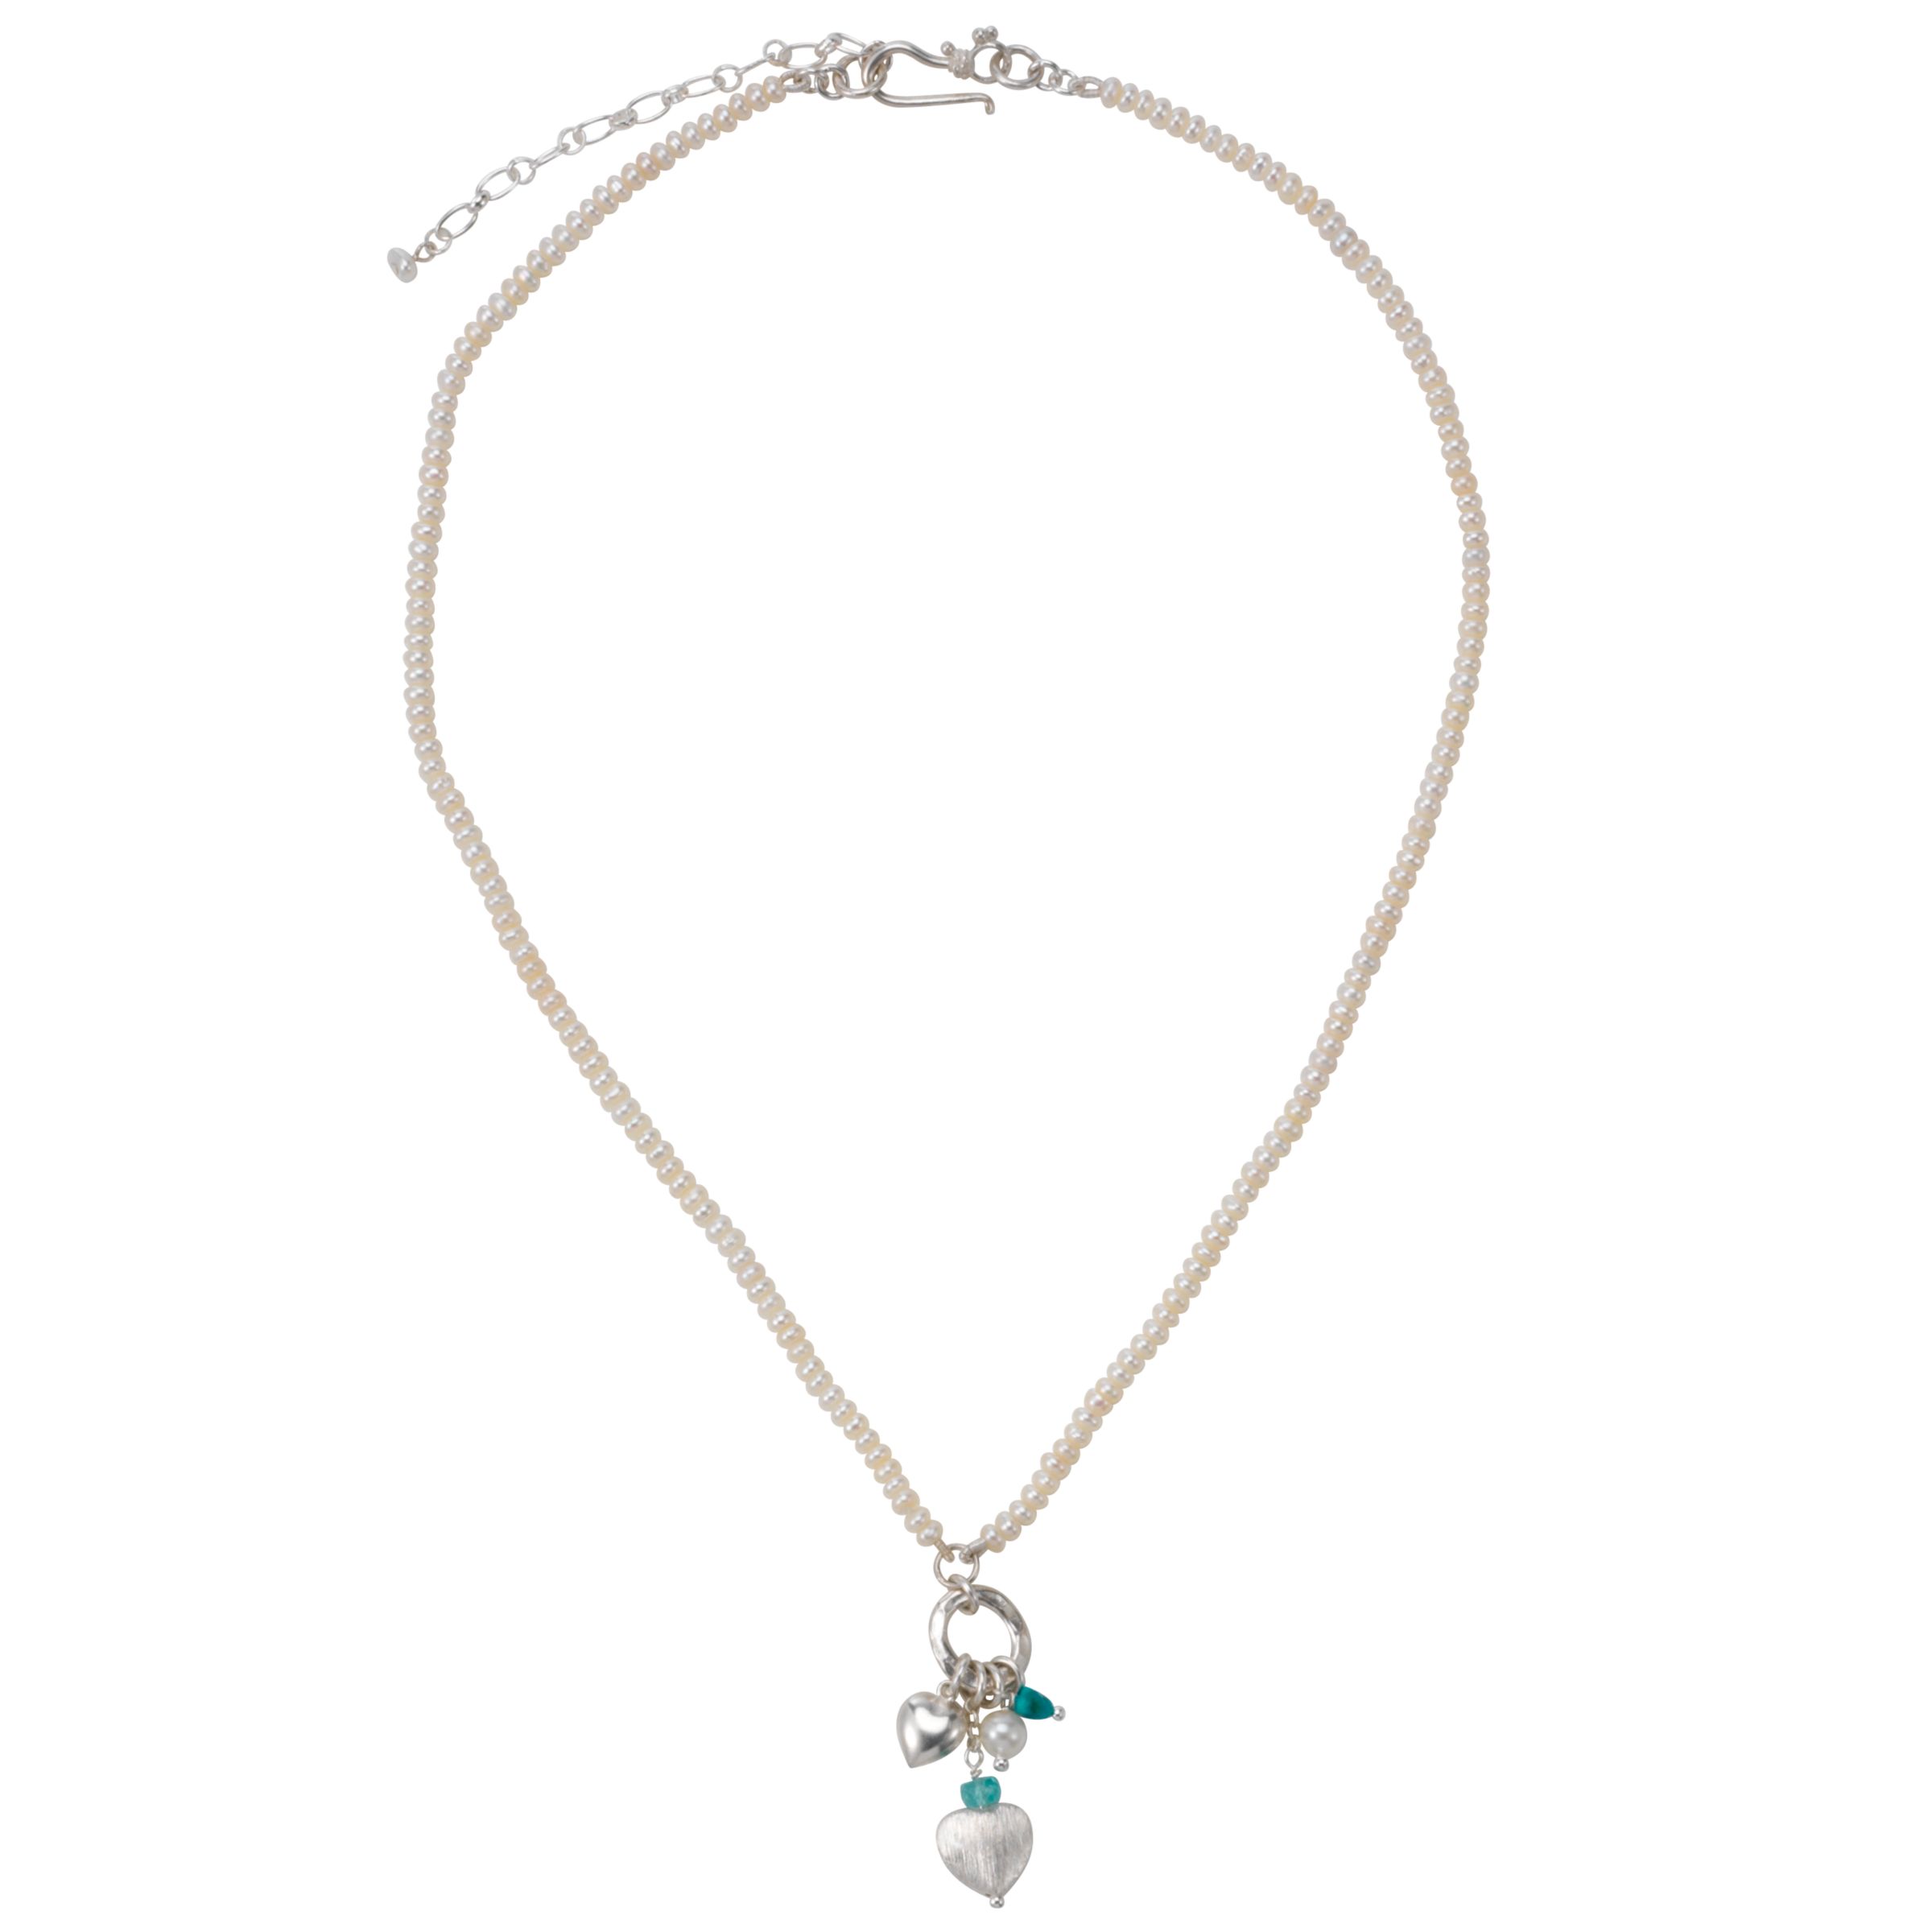 Cladia Bradby White Pearl Turquoise Charm Necklace